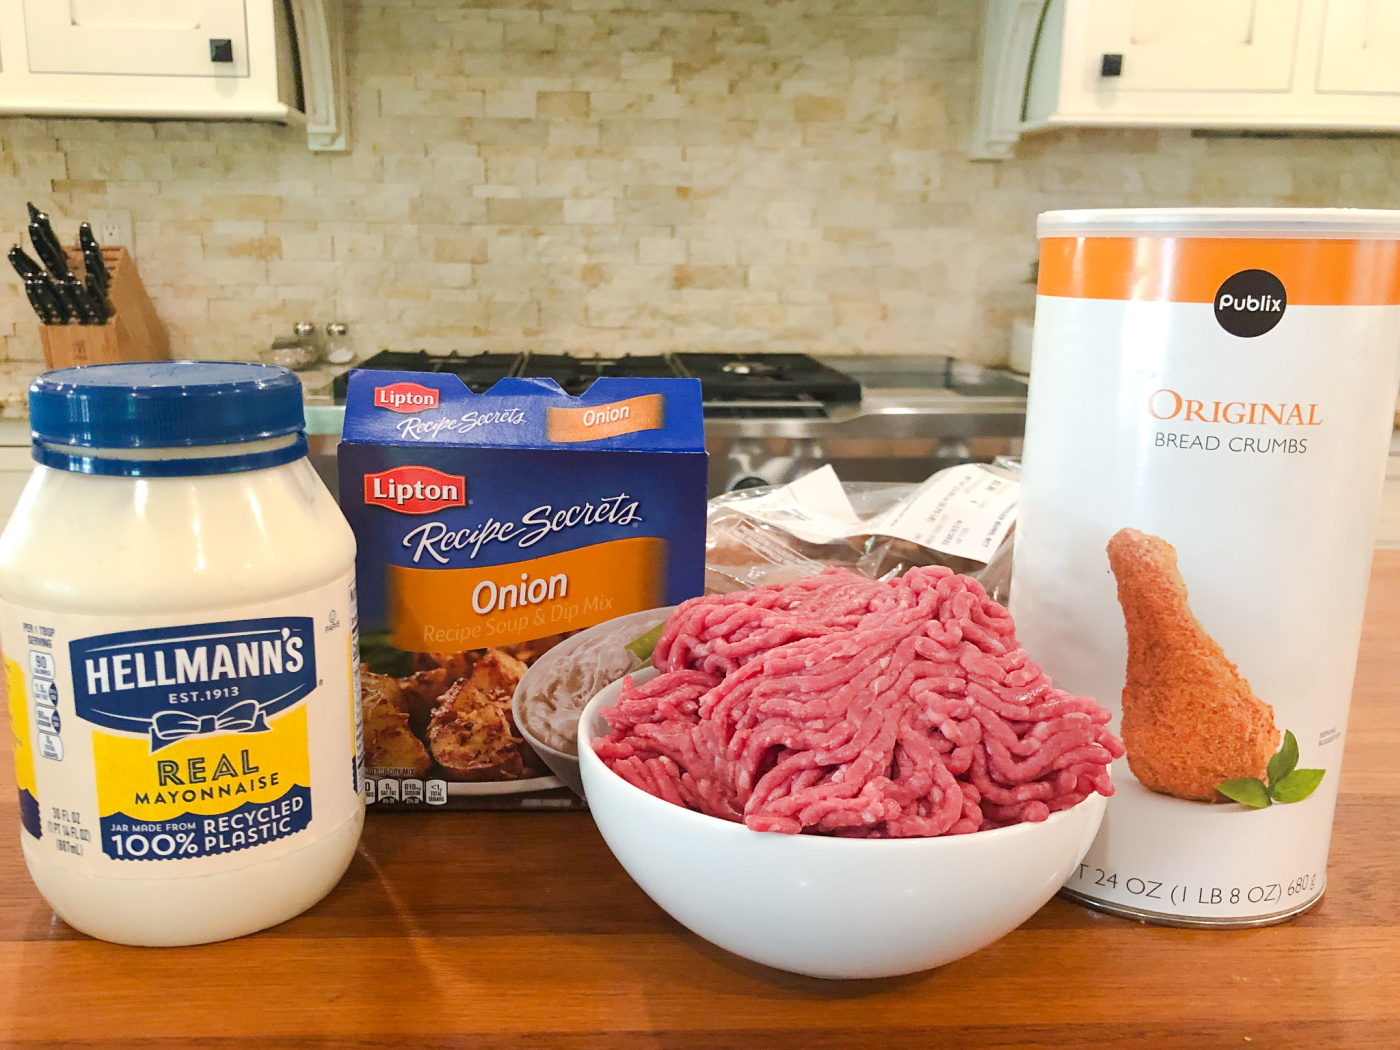 Best Ever Juicy Burgers Recipe Using Hellmann's Mayonnaise - BOGO Sale This Week At Publix! on I Heart Publix